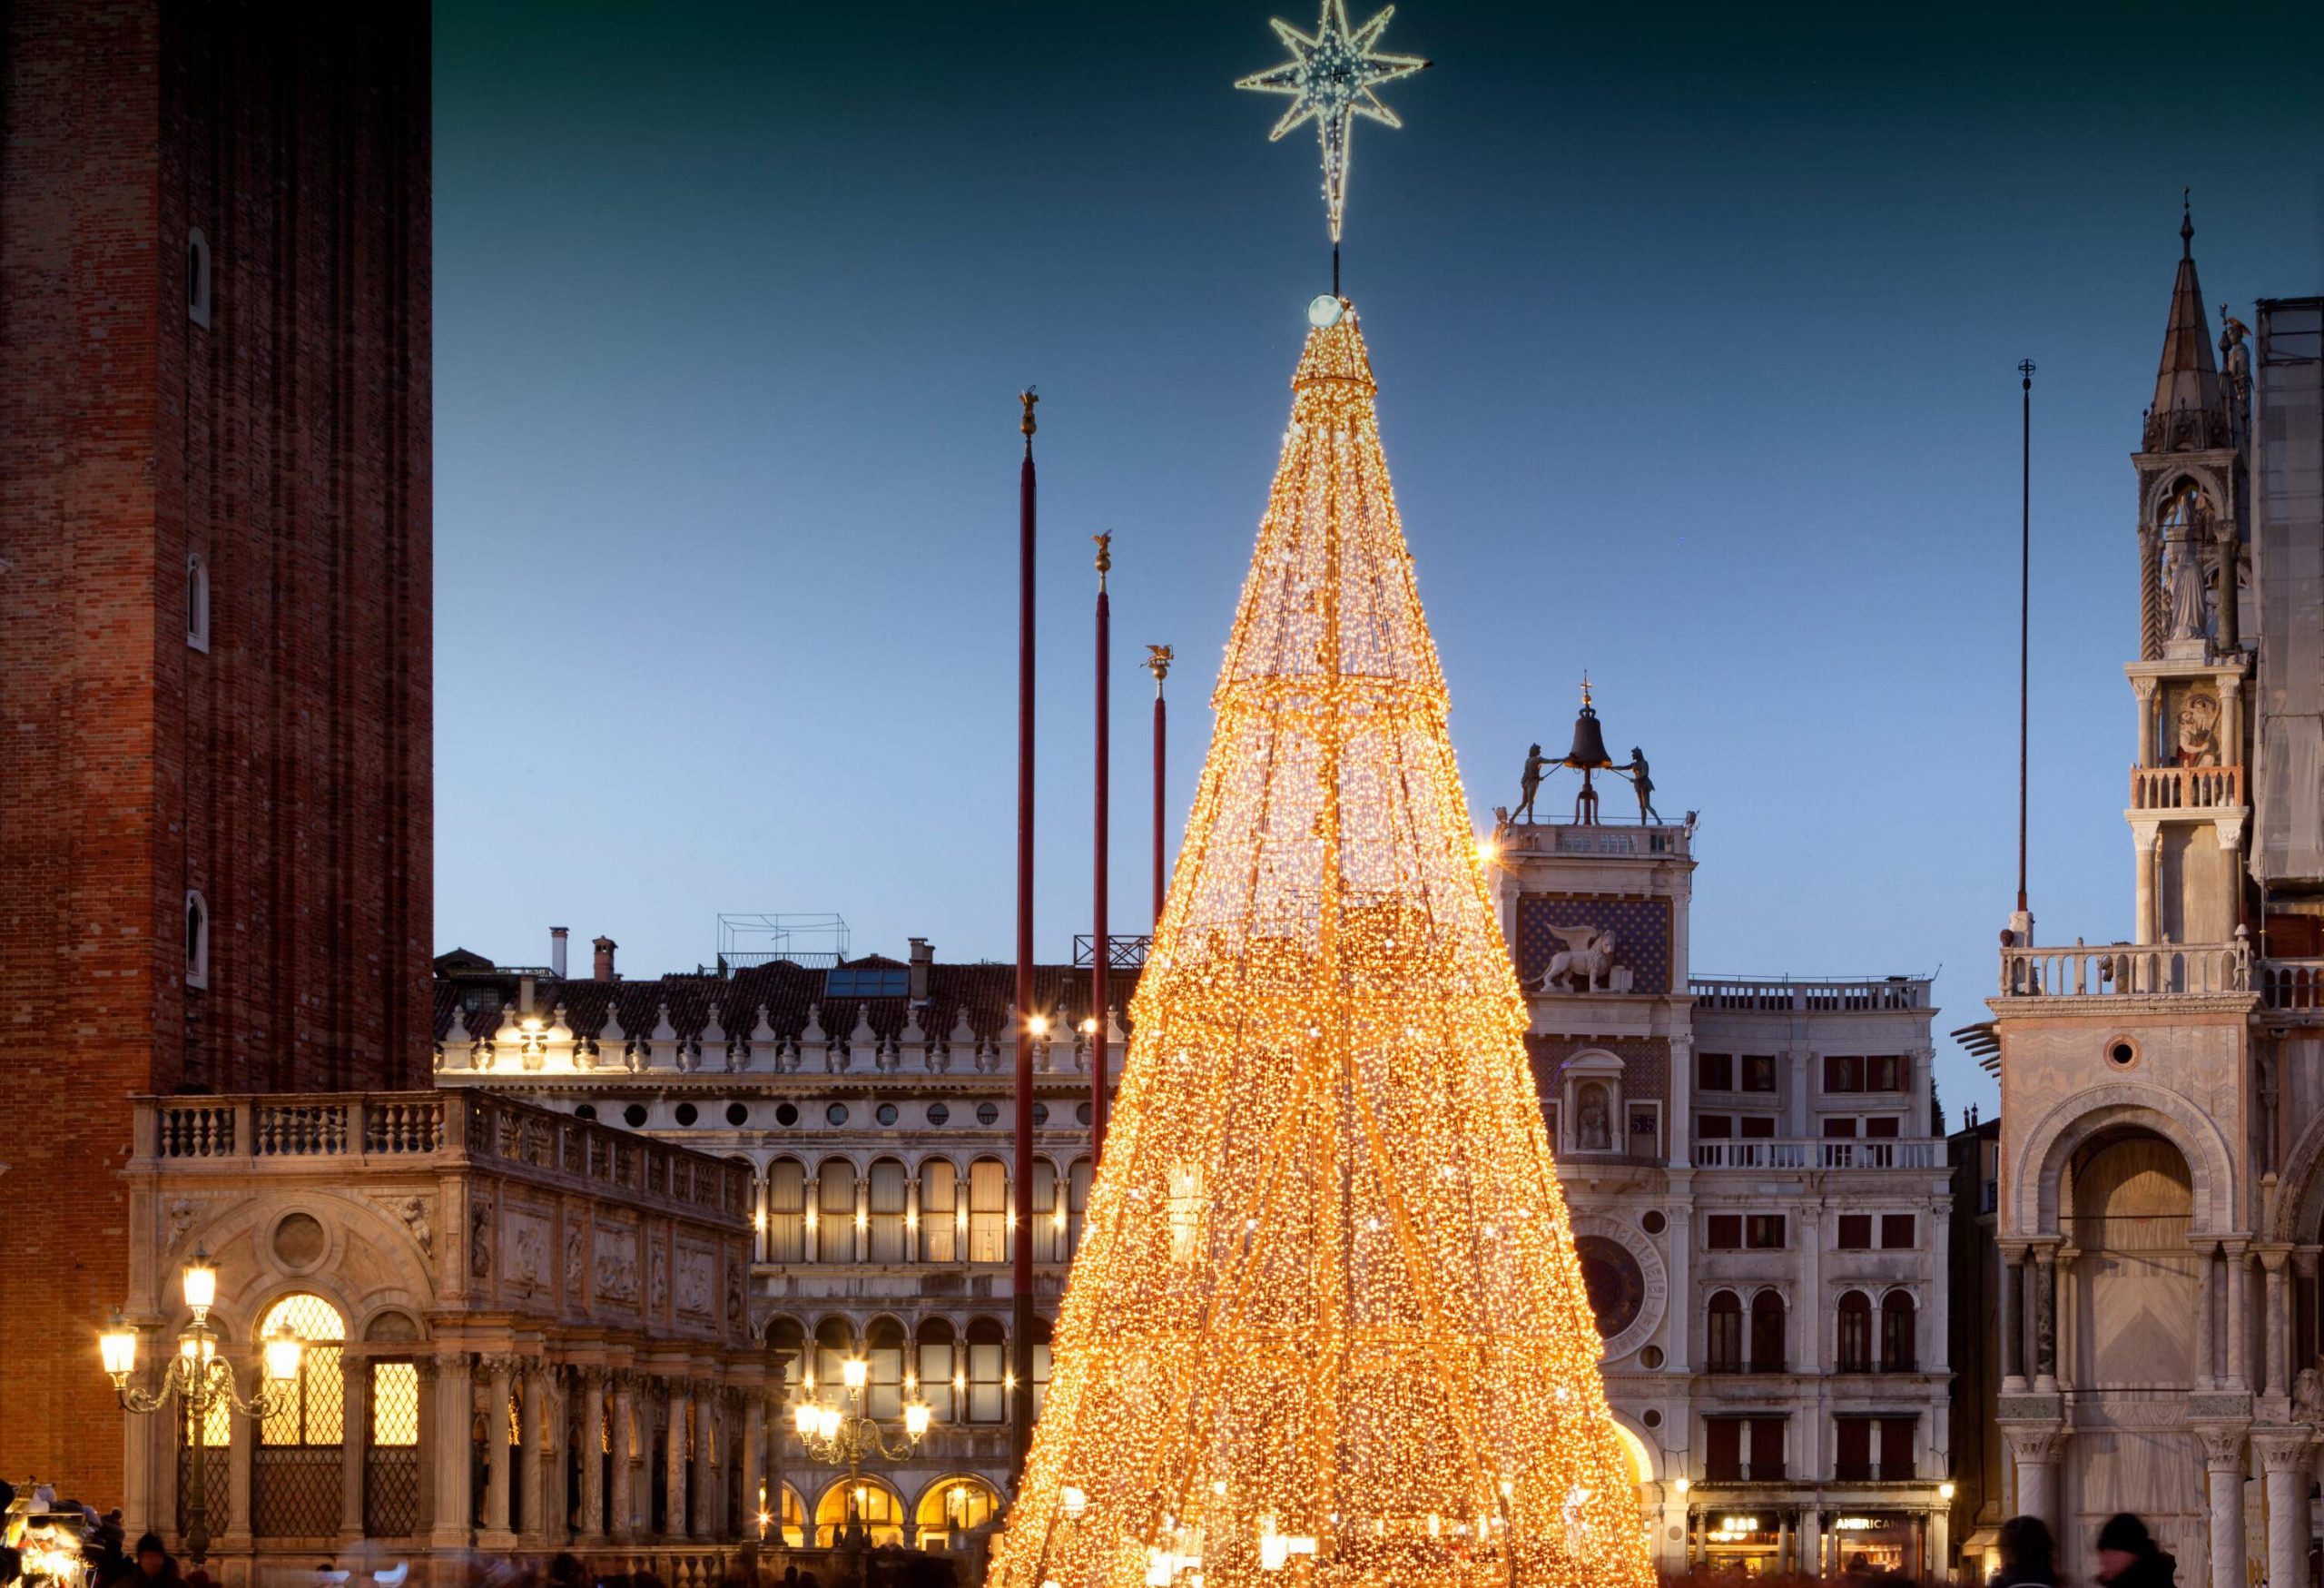 Renaissance-styled buildings surround a huge Christmas tree covered in yellow string lights.